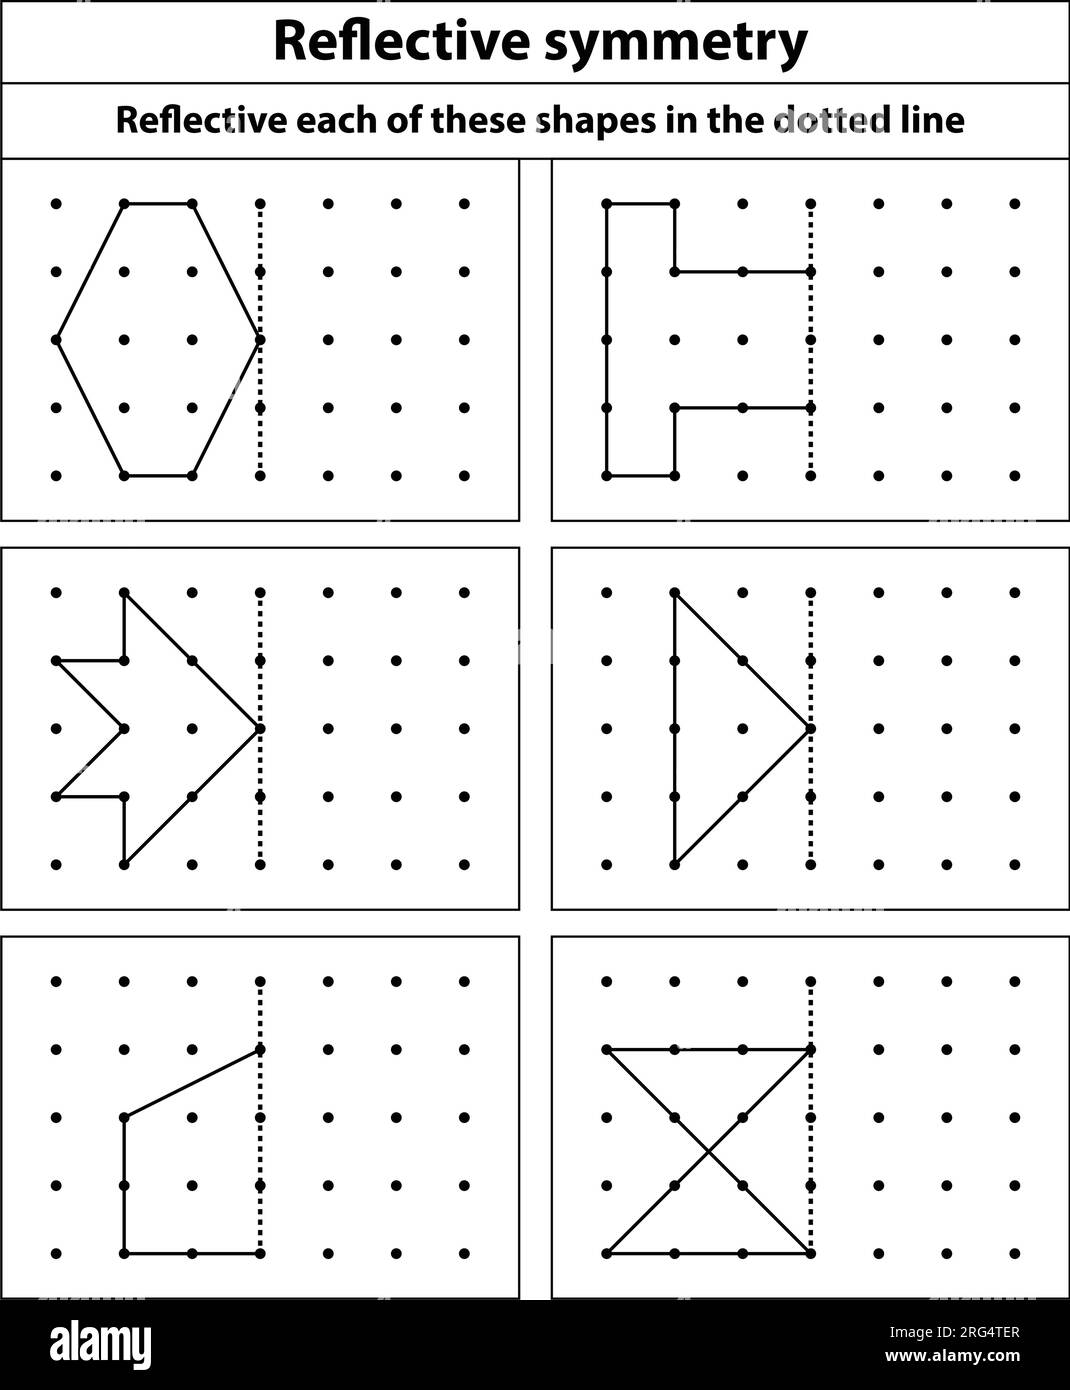 https://c8.alamy.com/comp/2RG4TER/dots-grid-reflective-symmetry-each-of-this-shapes-of-the-dotted-line-practice-exercise-background-line-drawing-school-math-sheet-2RG4TER.jpg